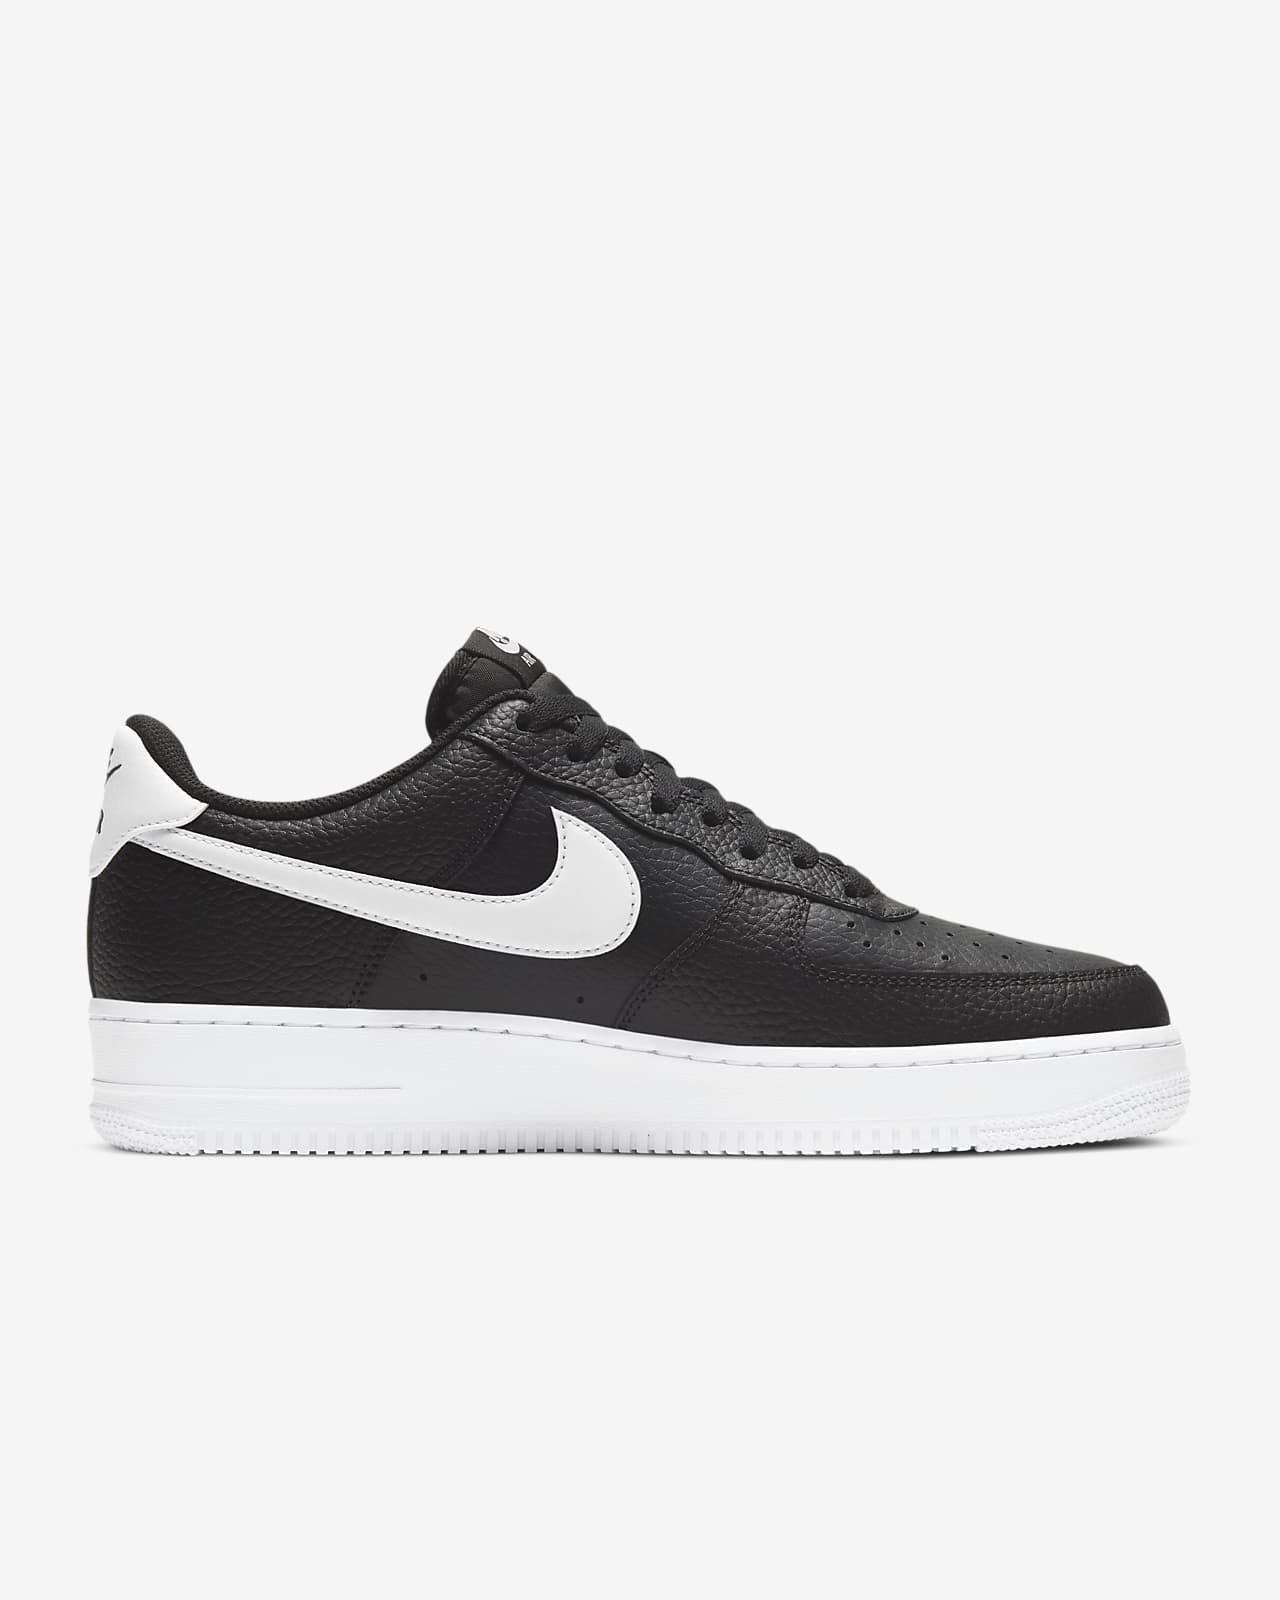 Chaussure Nike Air Force 1 '07 pour homme. Nike FR